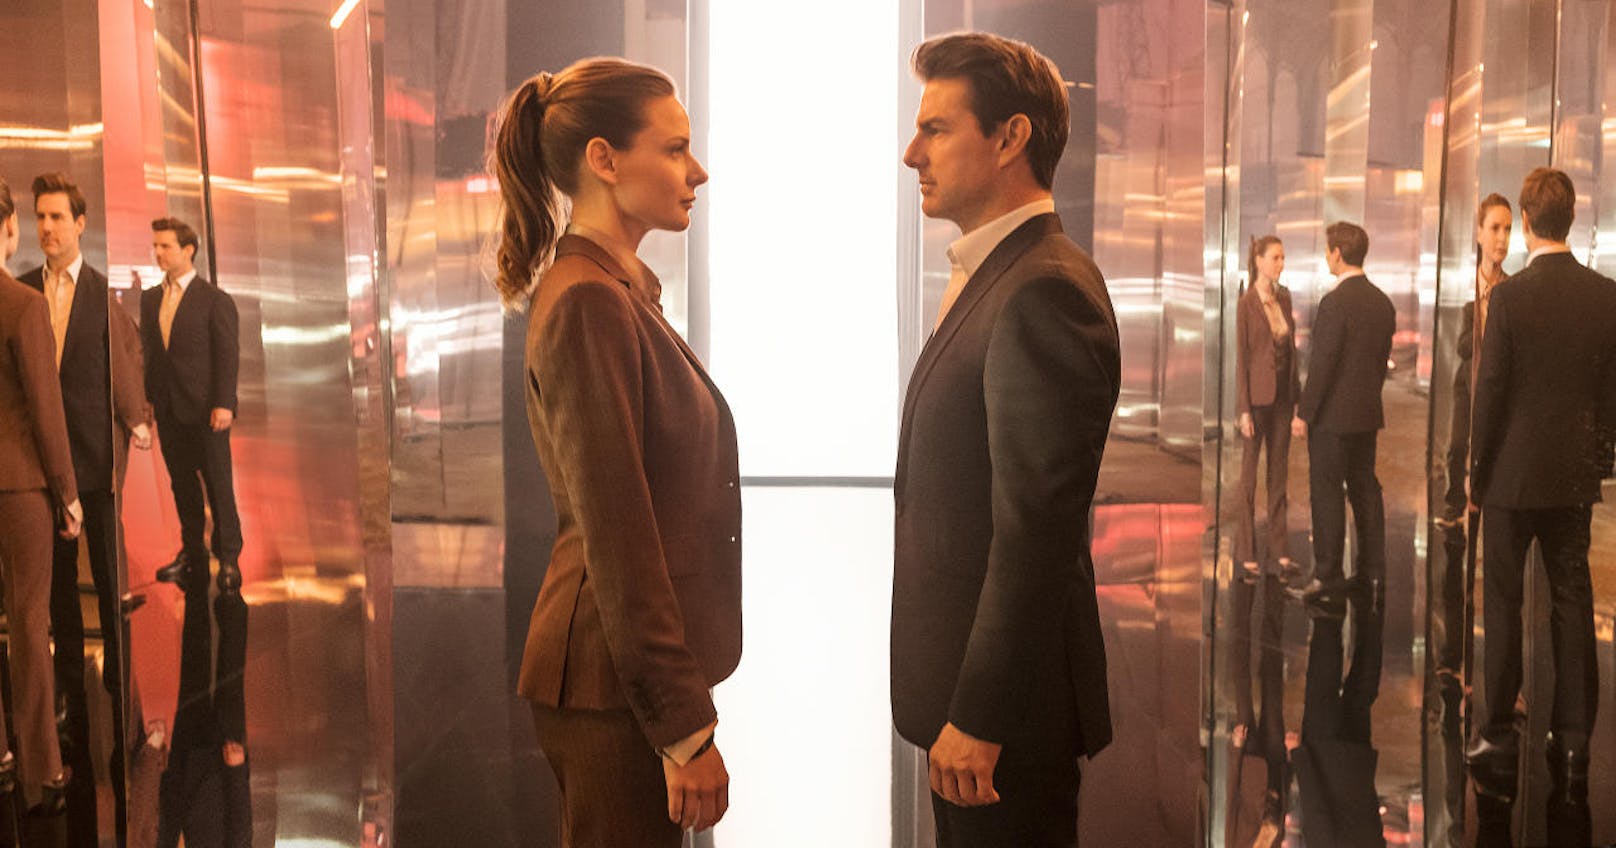 Rebecca Ferguson als Ilsa Faust und Tom Cruise als Ethan Hunt in "Mission: Impossible - Fallout"